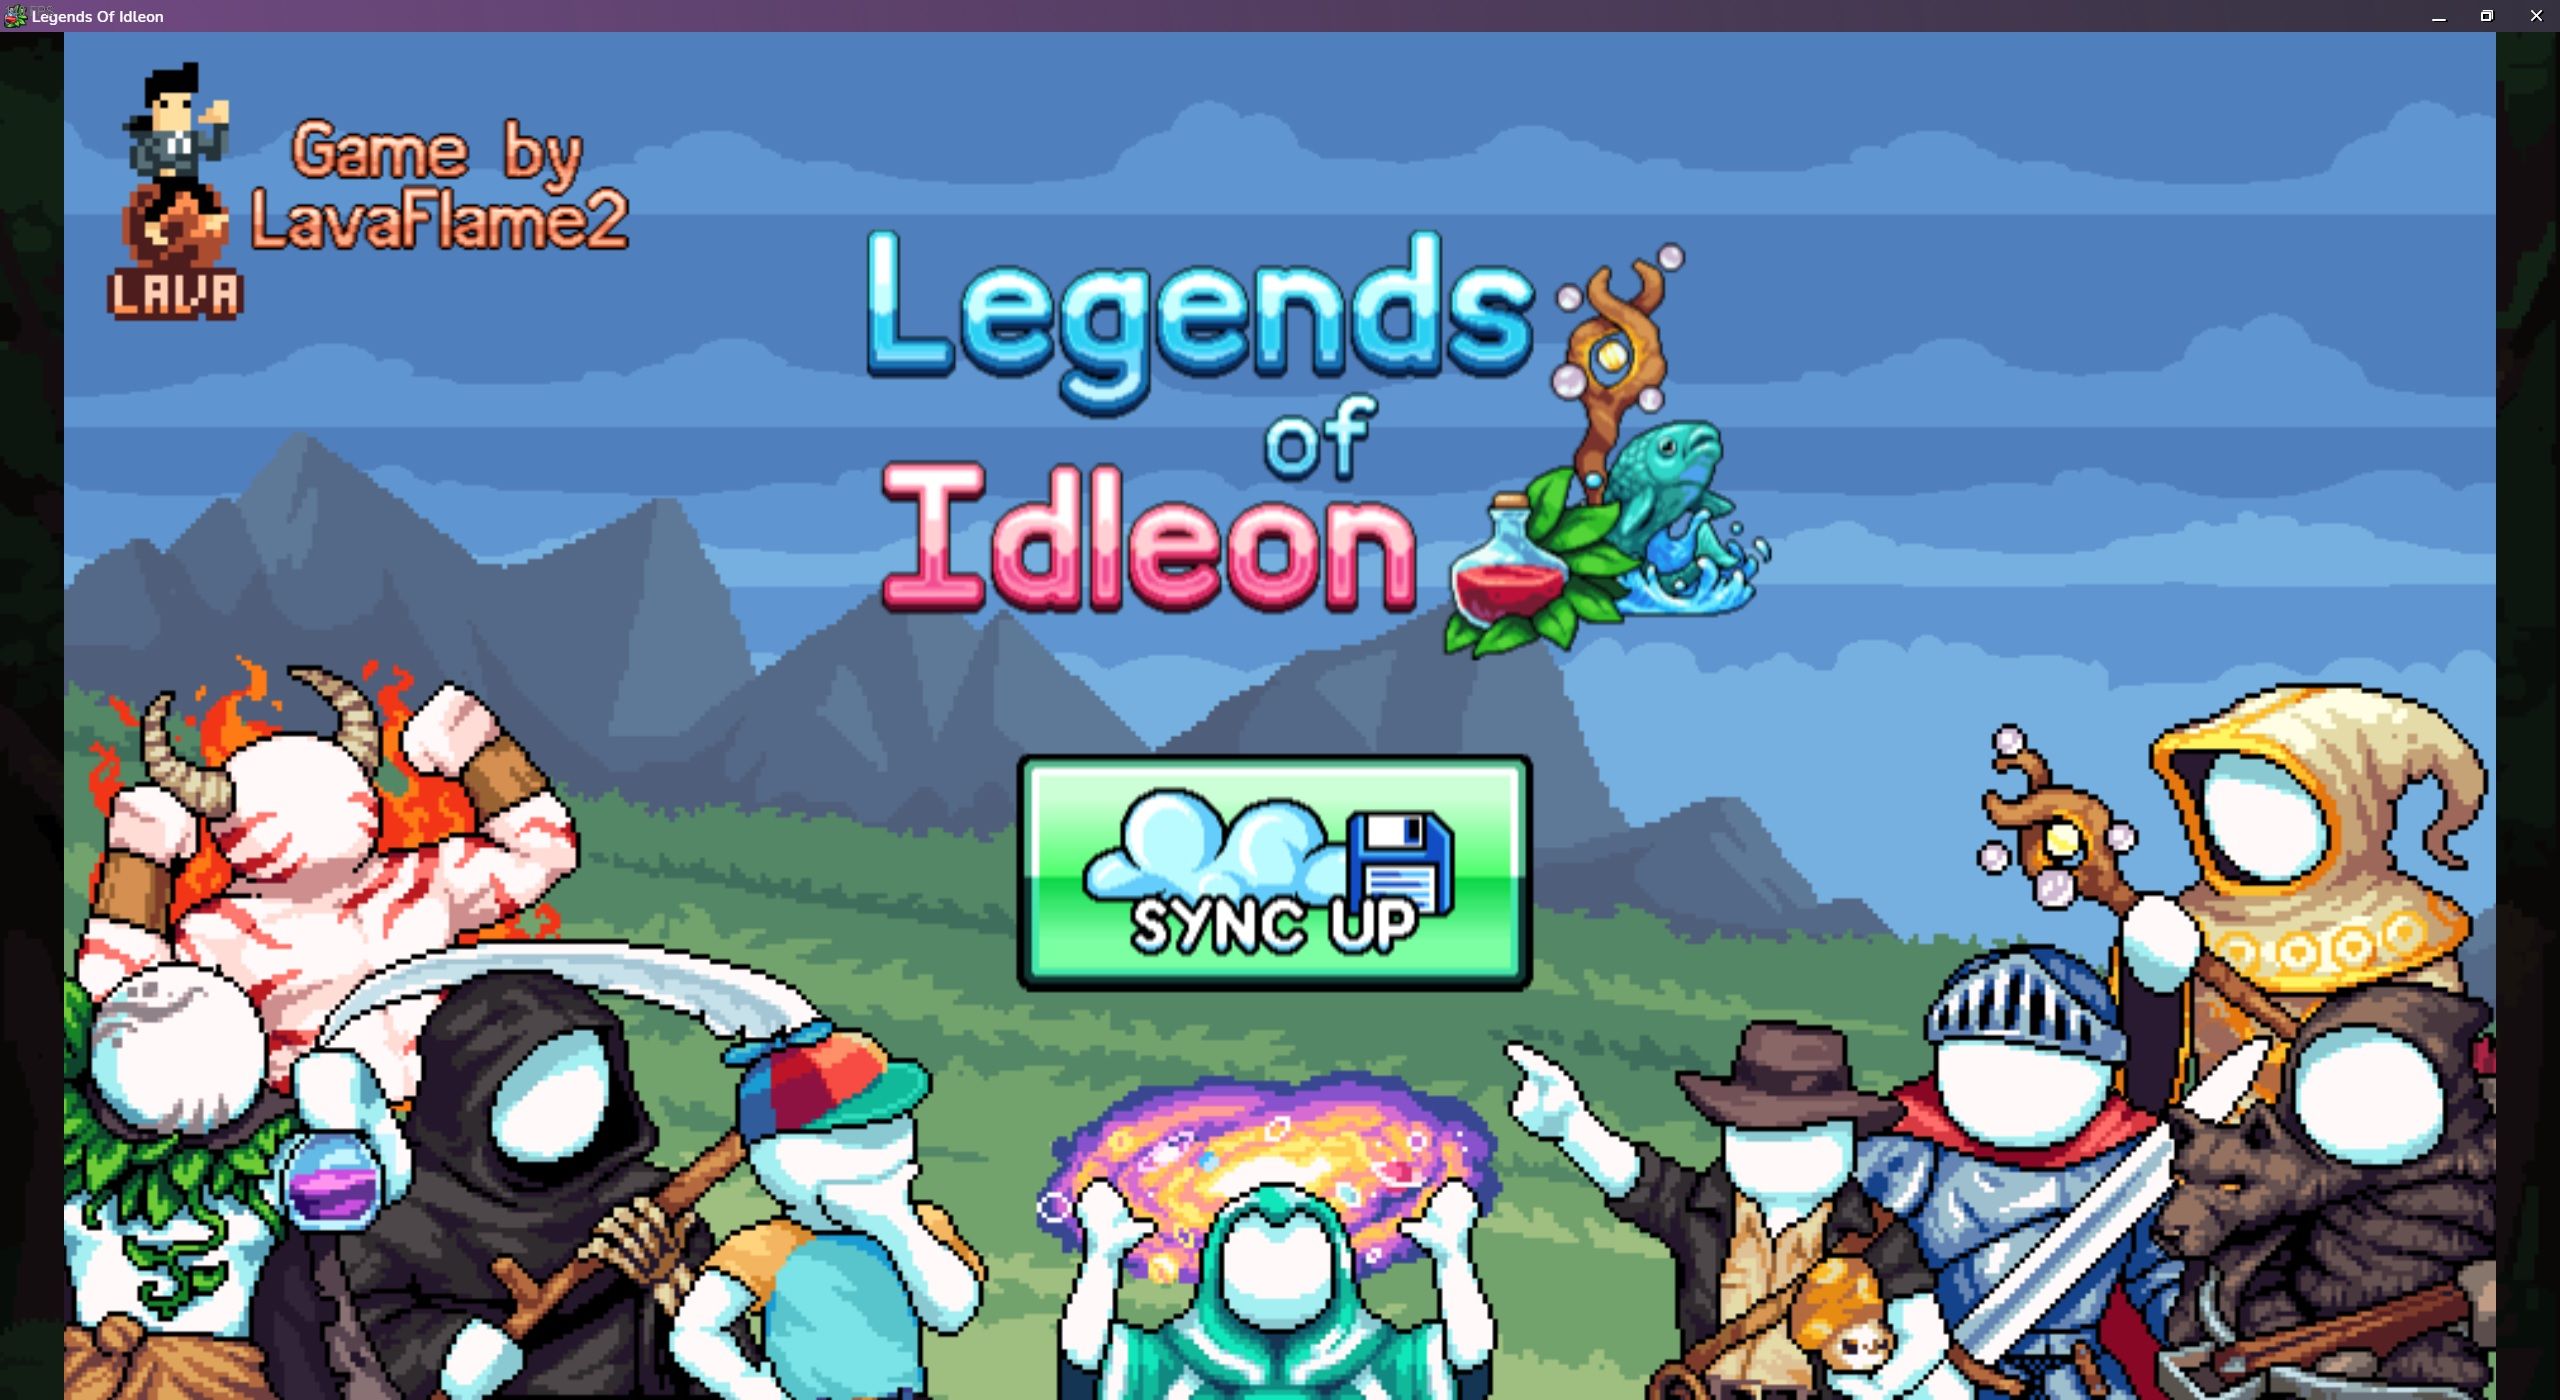 Looking for advice on leveling my wizard : r/idleon